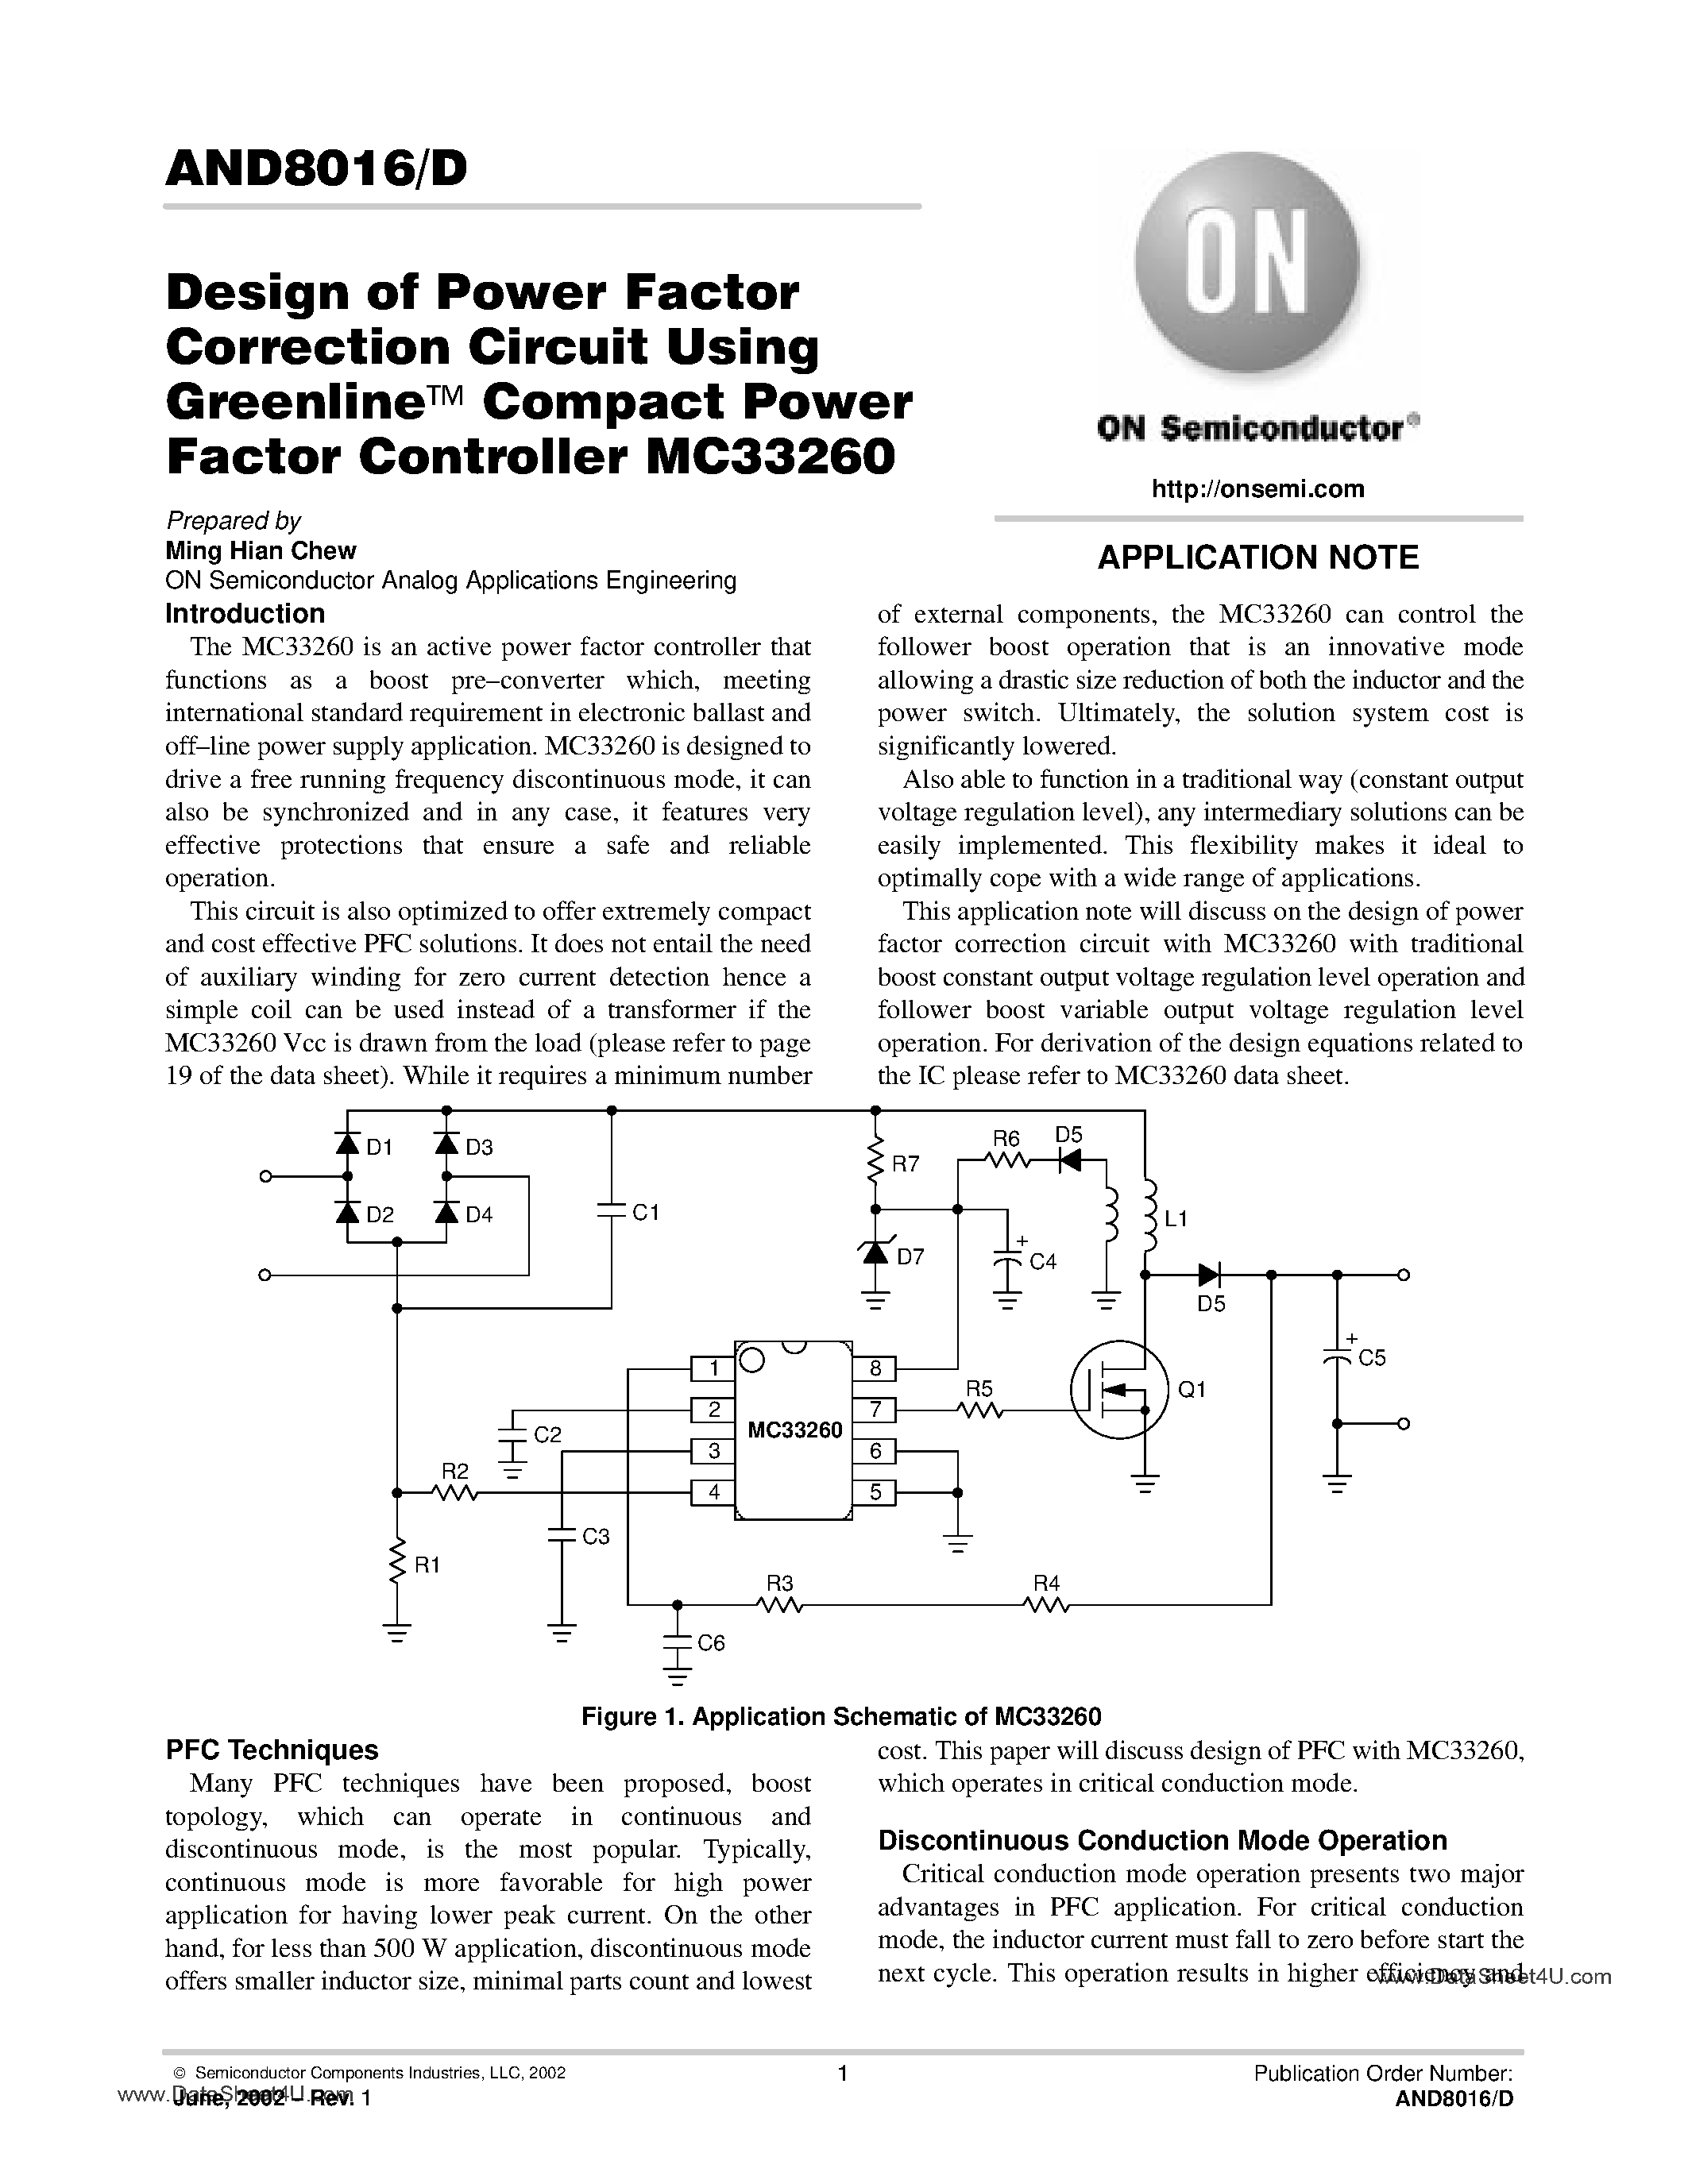 Даташит AND8016/D - Design of Power Factor Correction Circuit Using Greenline Compact Power Factor Controller страница 1